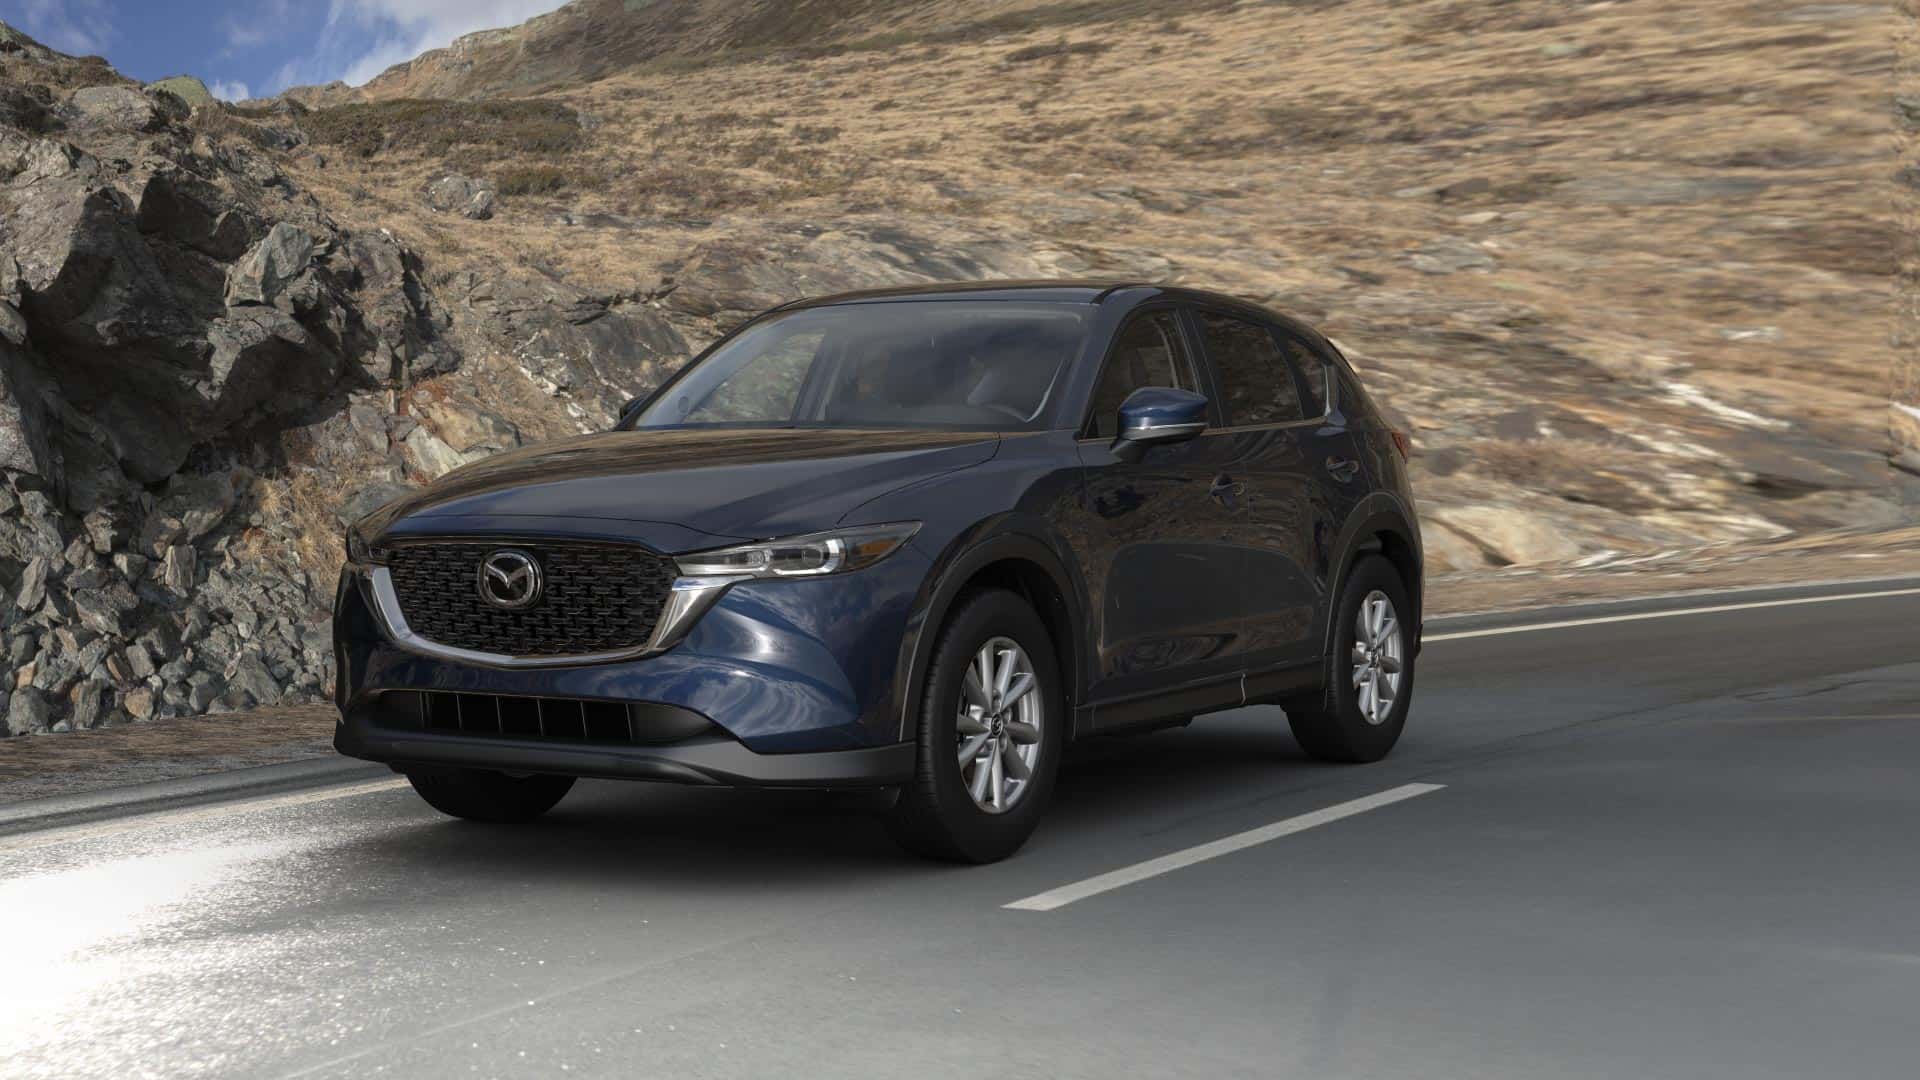 2023 Mazda CX-5 2.5 S Select Deep Crystal Blue Mica | Neil Huffman Mazda in Louisville KY